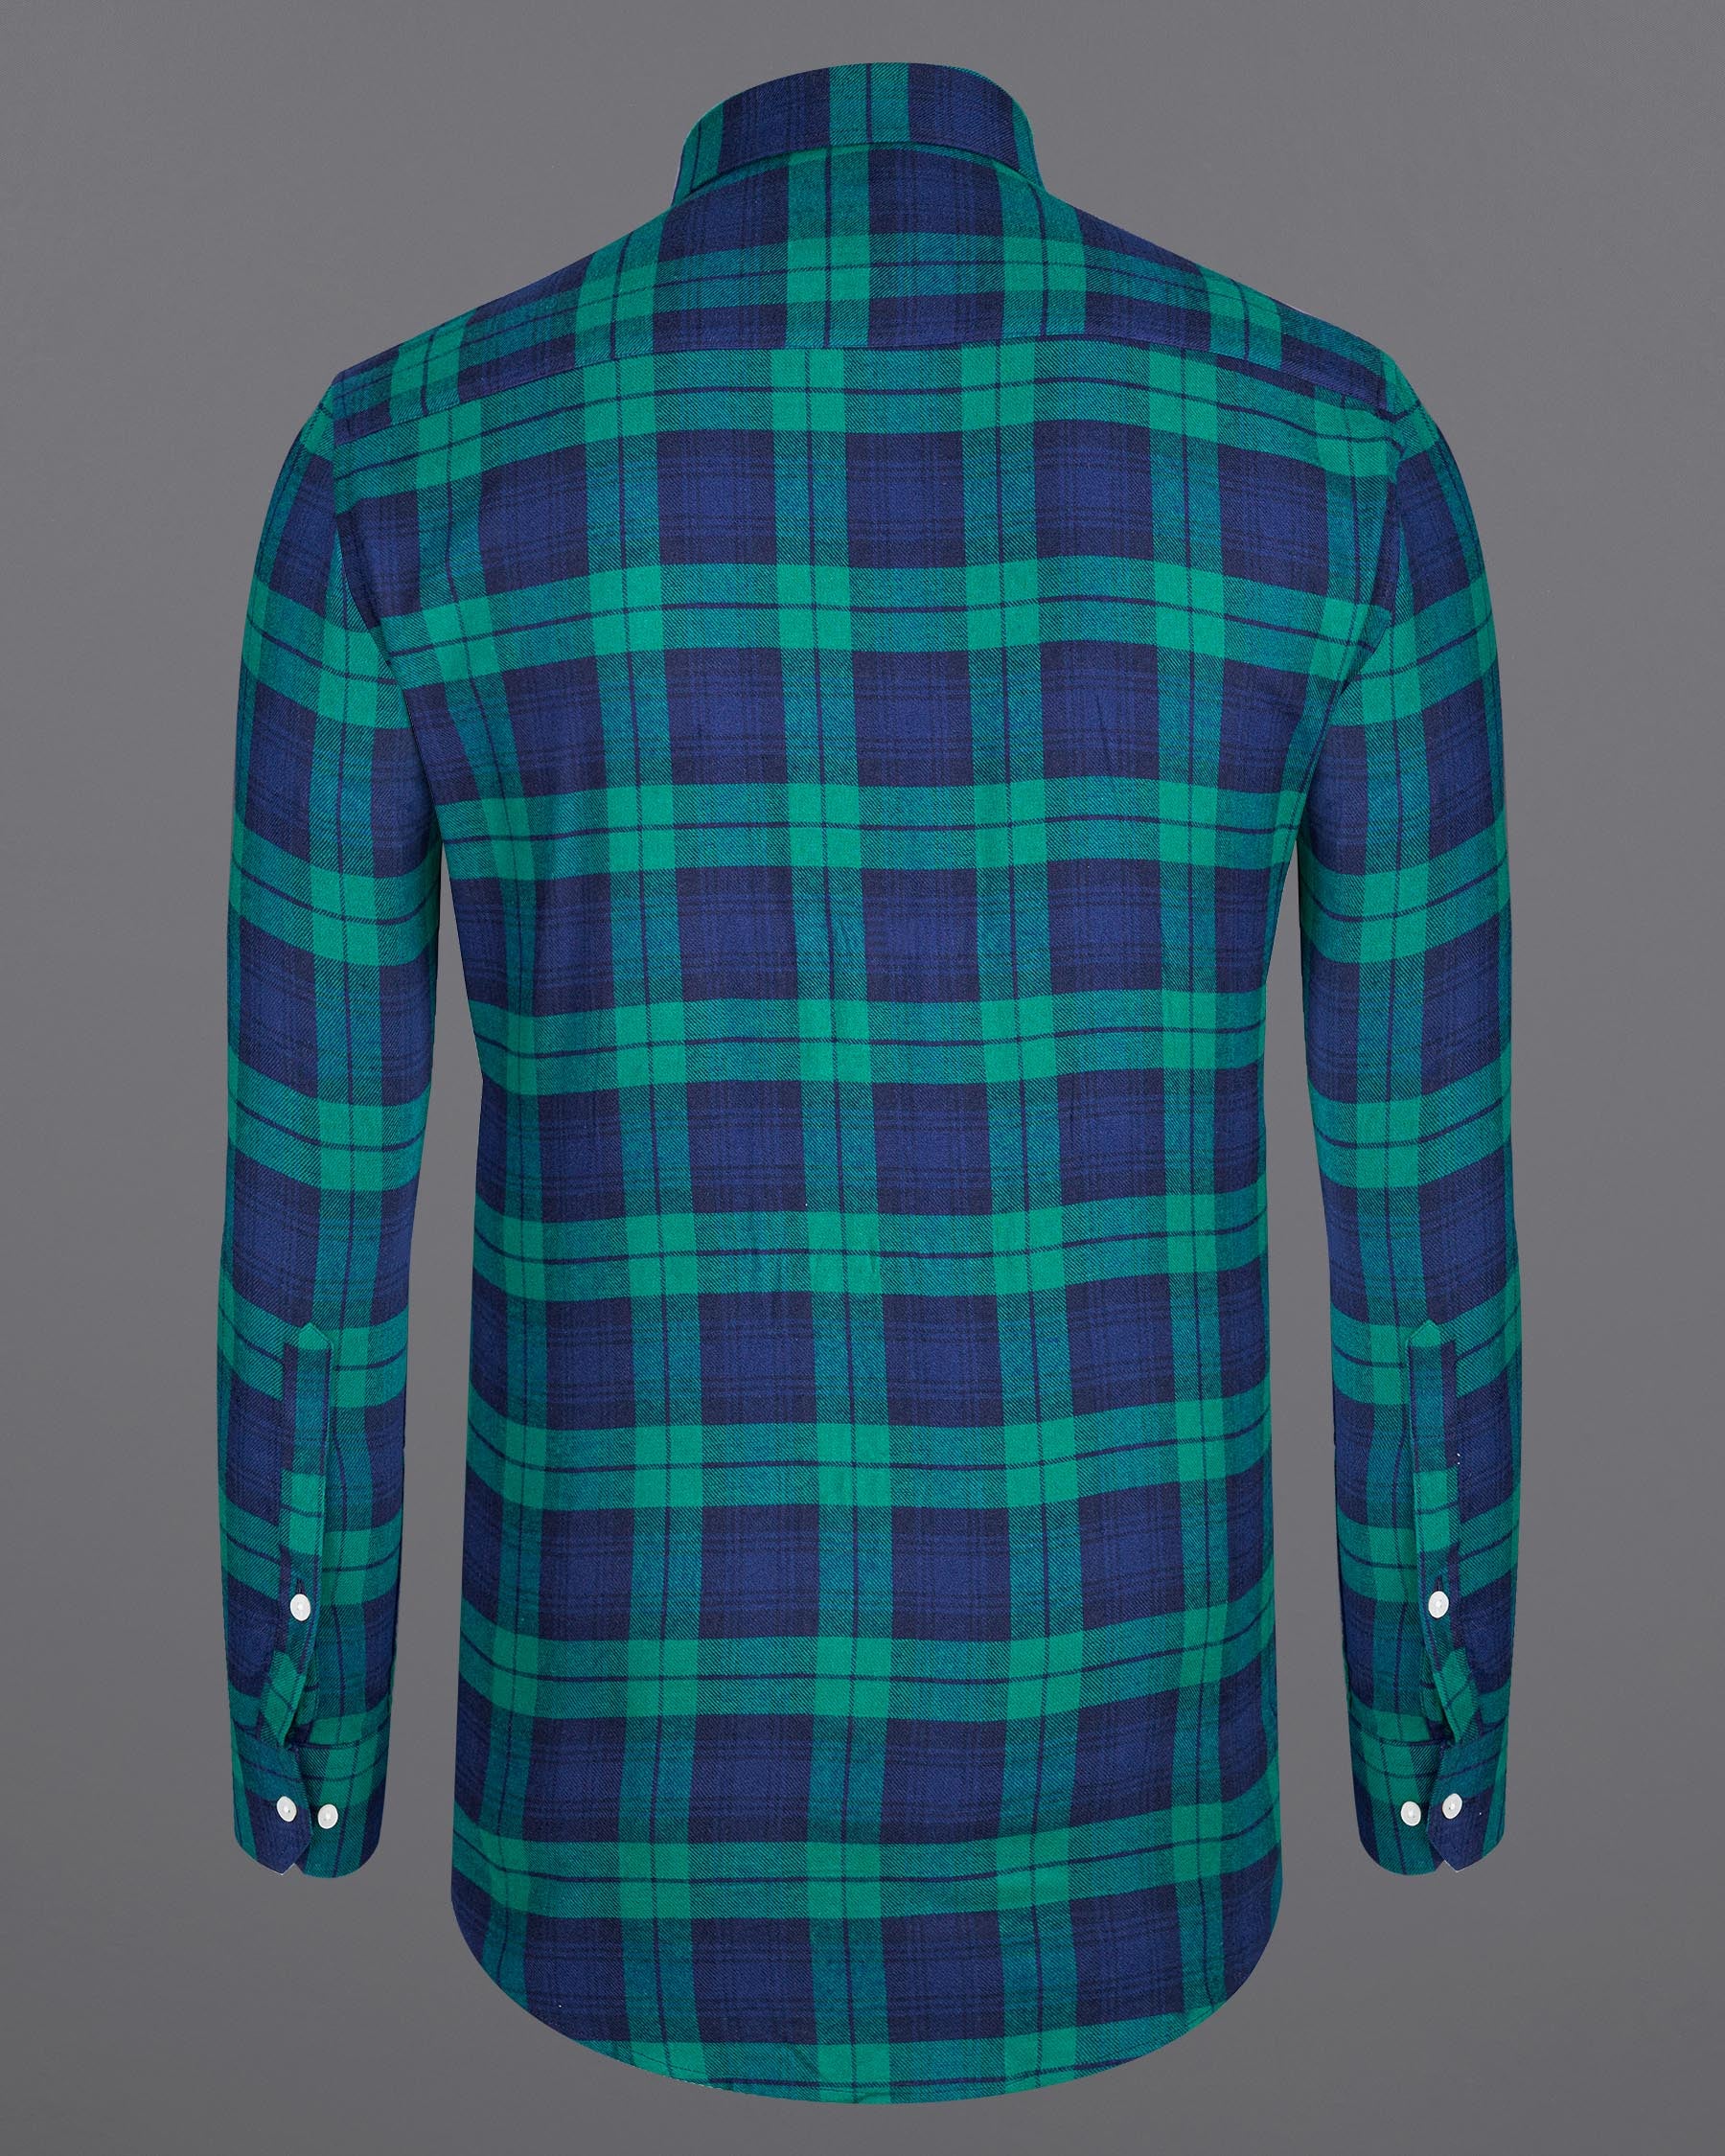 Bunting Blue and Deep Teal Green Plaid Flannel Shirt 6997-BD-38,6997-BD-38,6997-BD-39,6997-BD-39,6997-BD-40,6997-BD-40,6997-BD-42,6997-BD-42,6997-BD-44,6997-BD-44,6997-BD-46,6997-BD-46,6997-BD-48,6997-BD-48,6997-BD-50,6997-BD-50,6997-BD-52,6997-BD-52